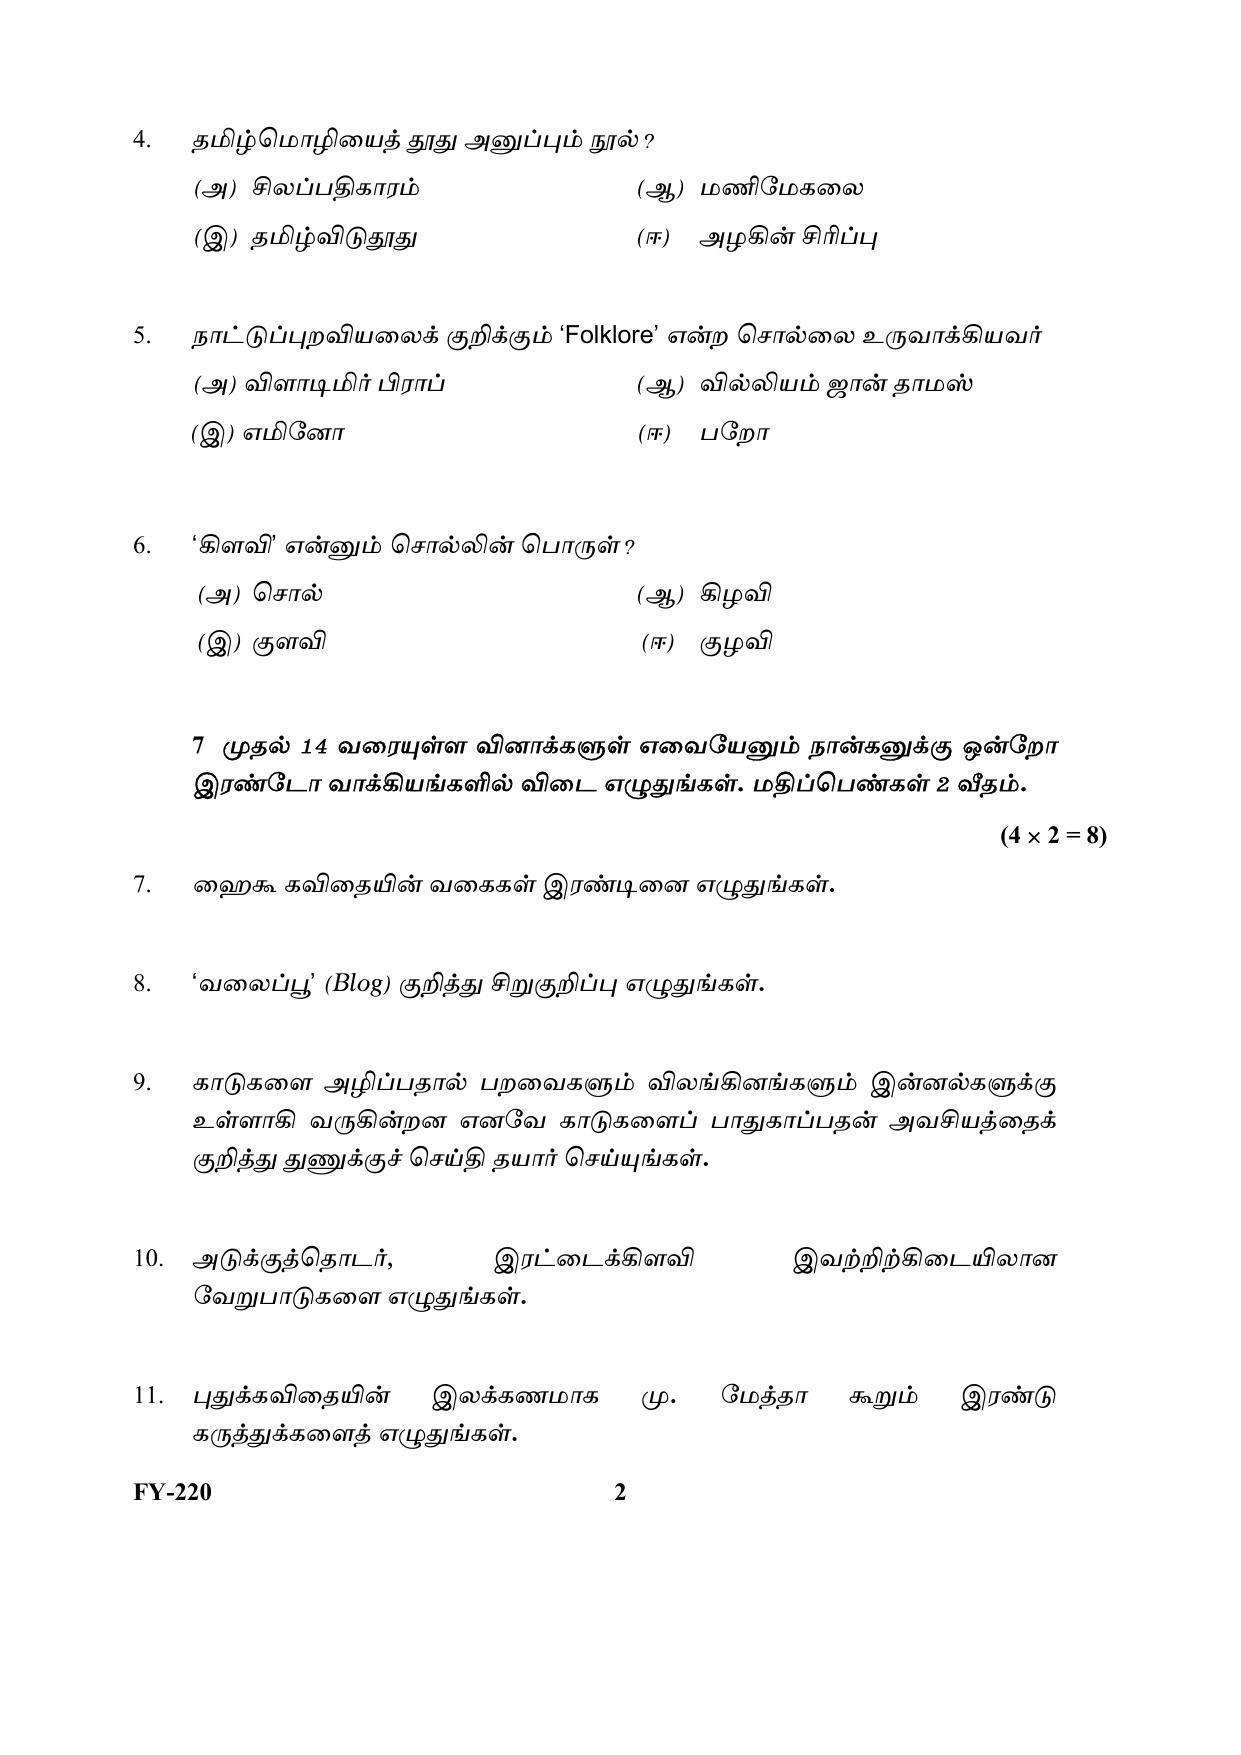 Kerala Plus One (Class 11th) Part-III Tamil-Optional Question Paper 2021 - Page 2